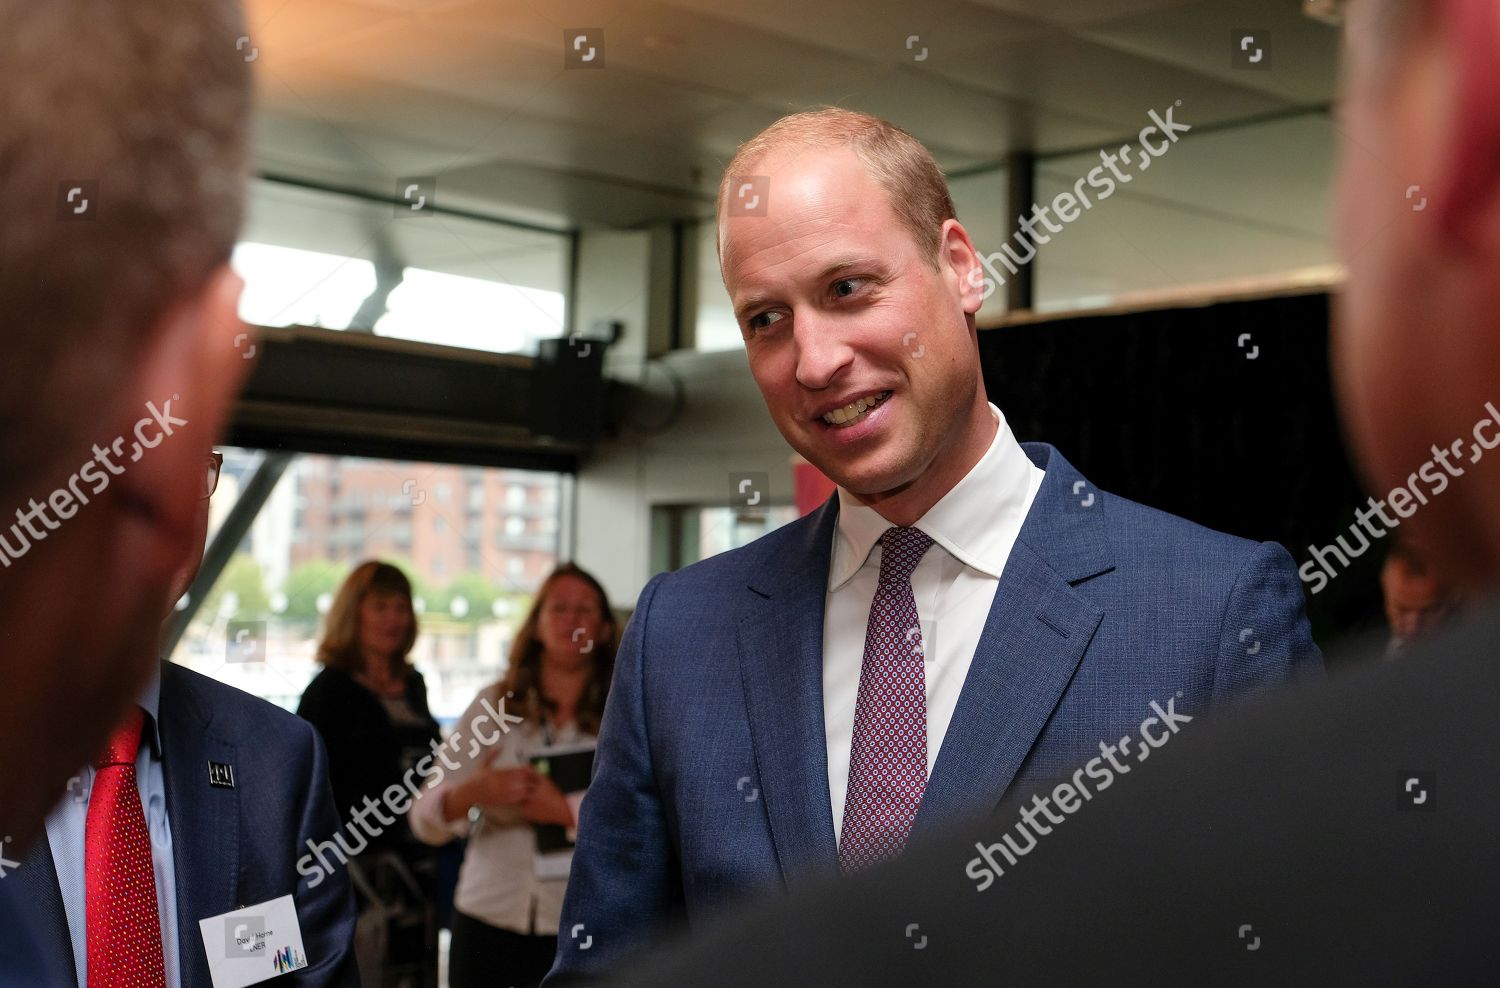 prince-william-visit-to-the-great-exhibition-of-the-north-newcastle-uk-shutterstock-editorial-9876204h.jpg